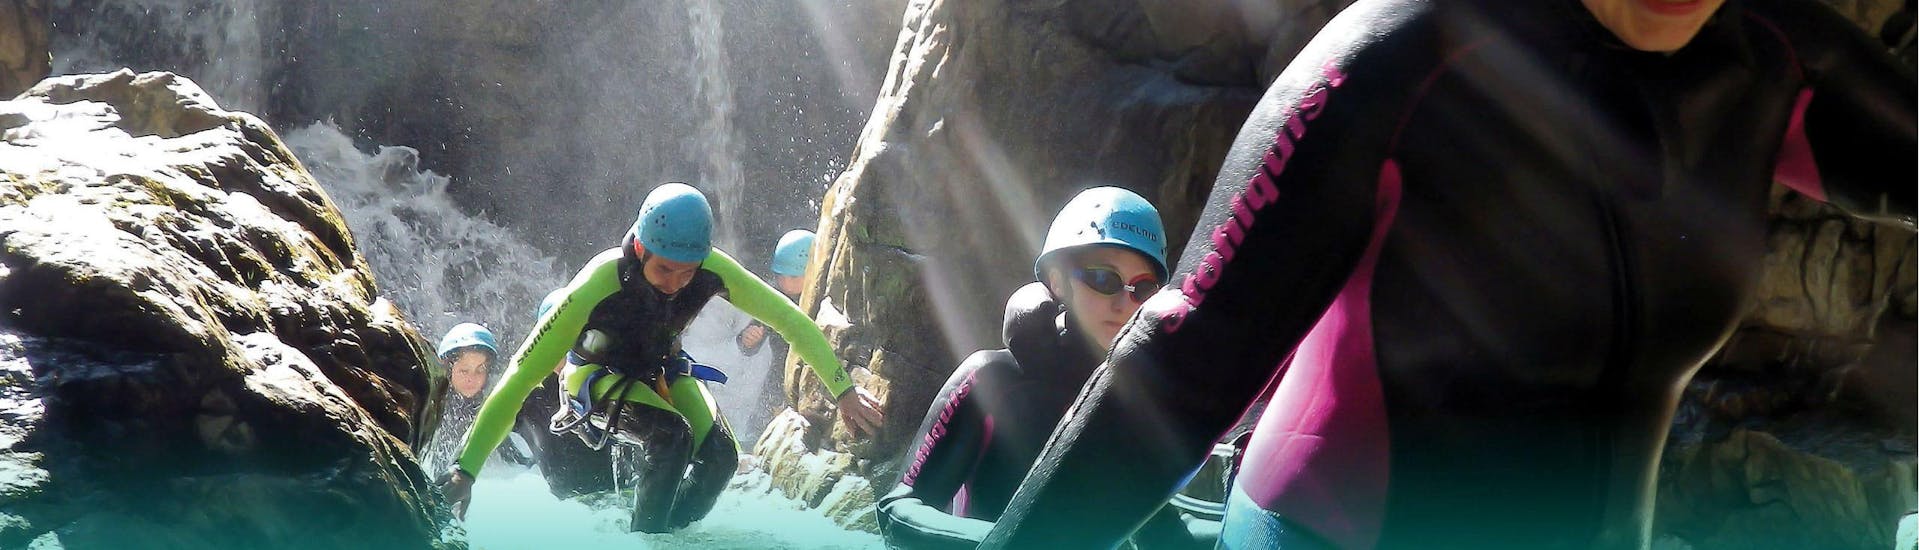 Canyoning sportif à Ainet.